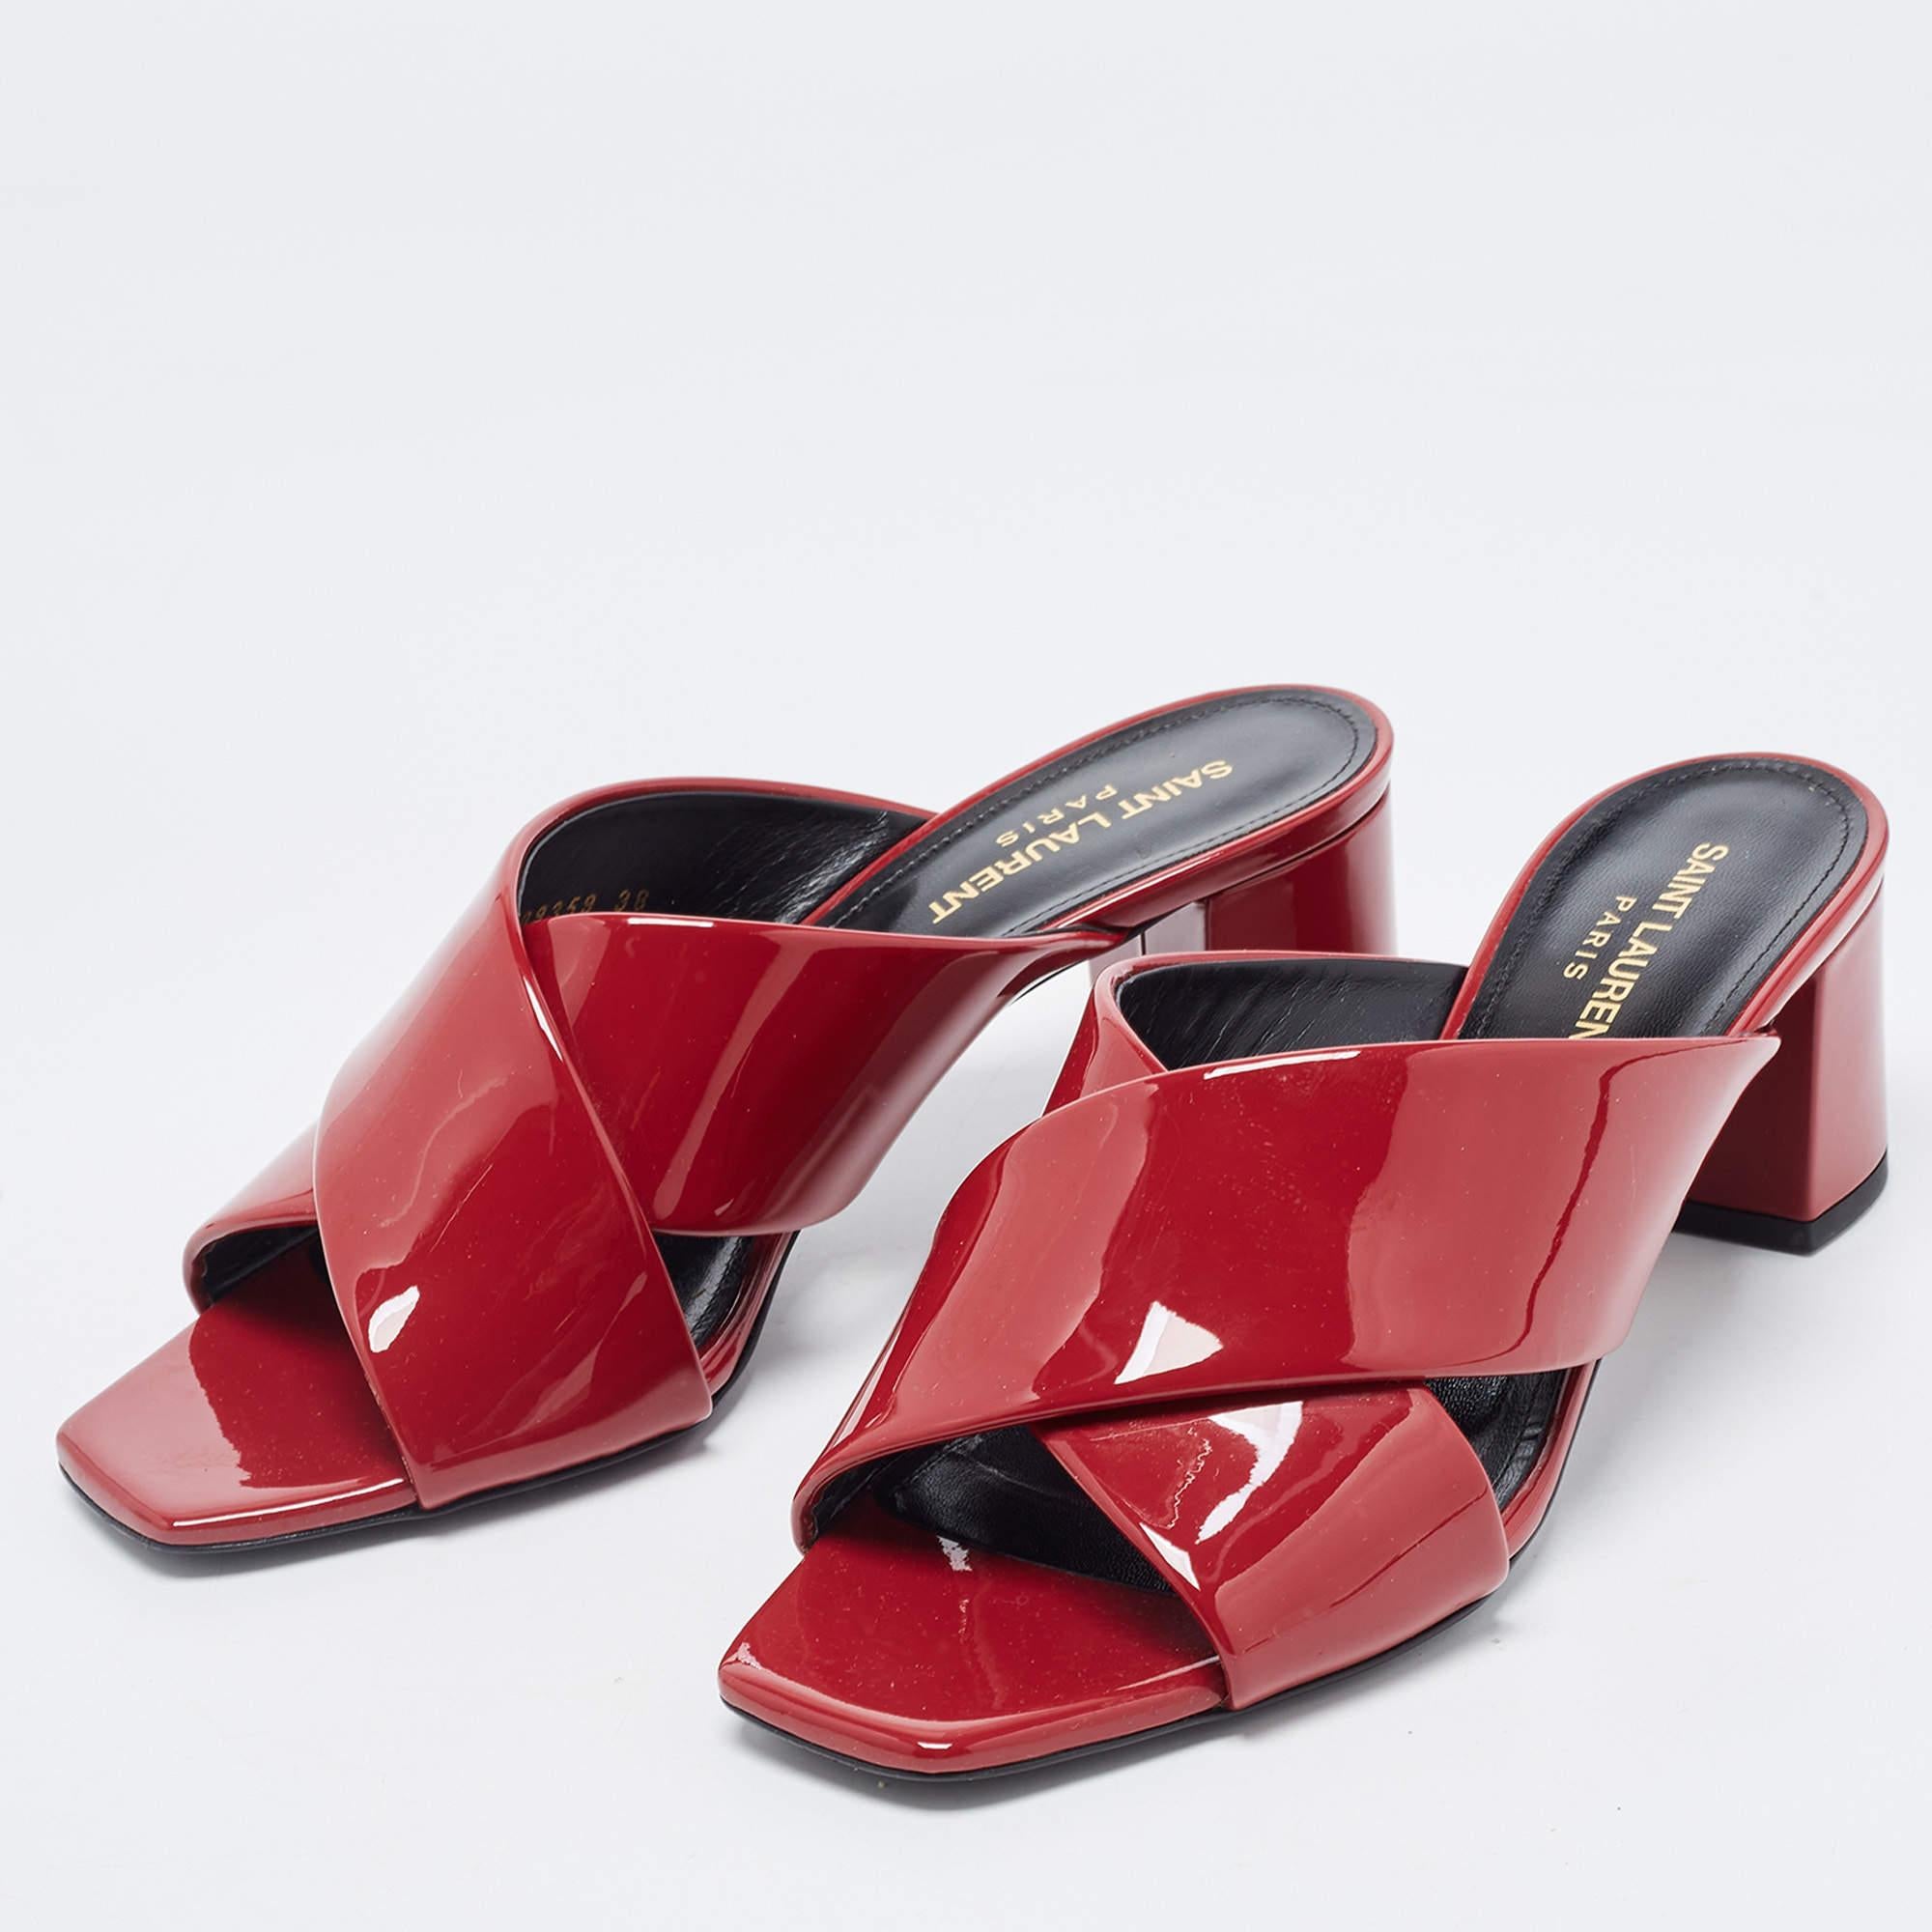 Stylish, sleek & sophisticated, these sandals by Saint Laurent will make sure you are ready for the day and night. Crafted meticulously from glossy patent leather, these Loulou sandals have open toes, criss-cross straps, block heels, and durable